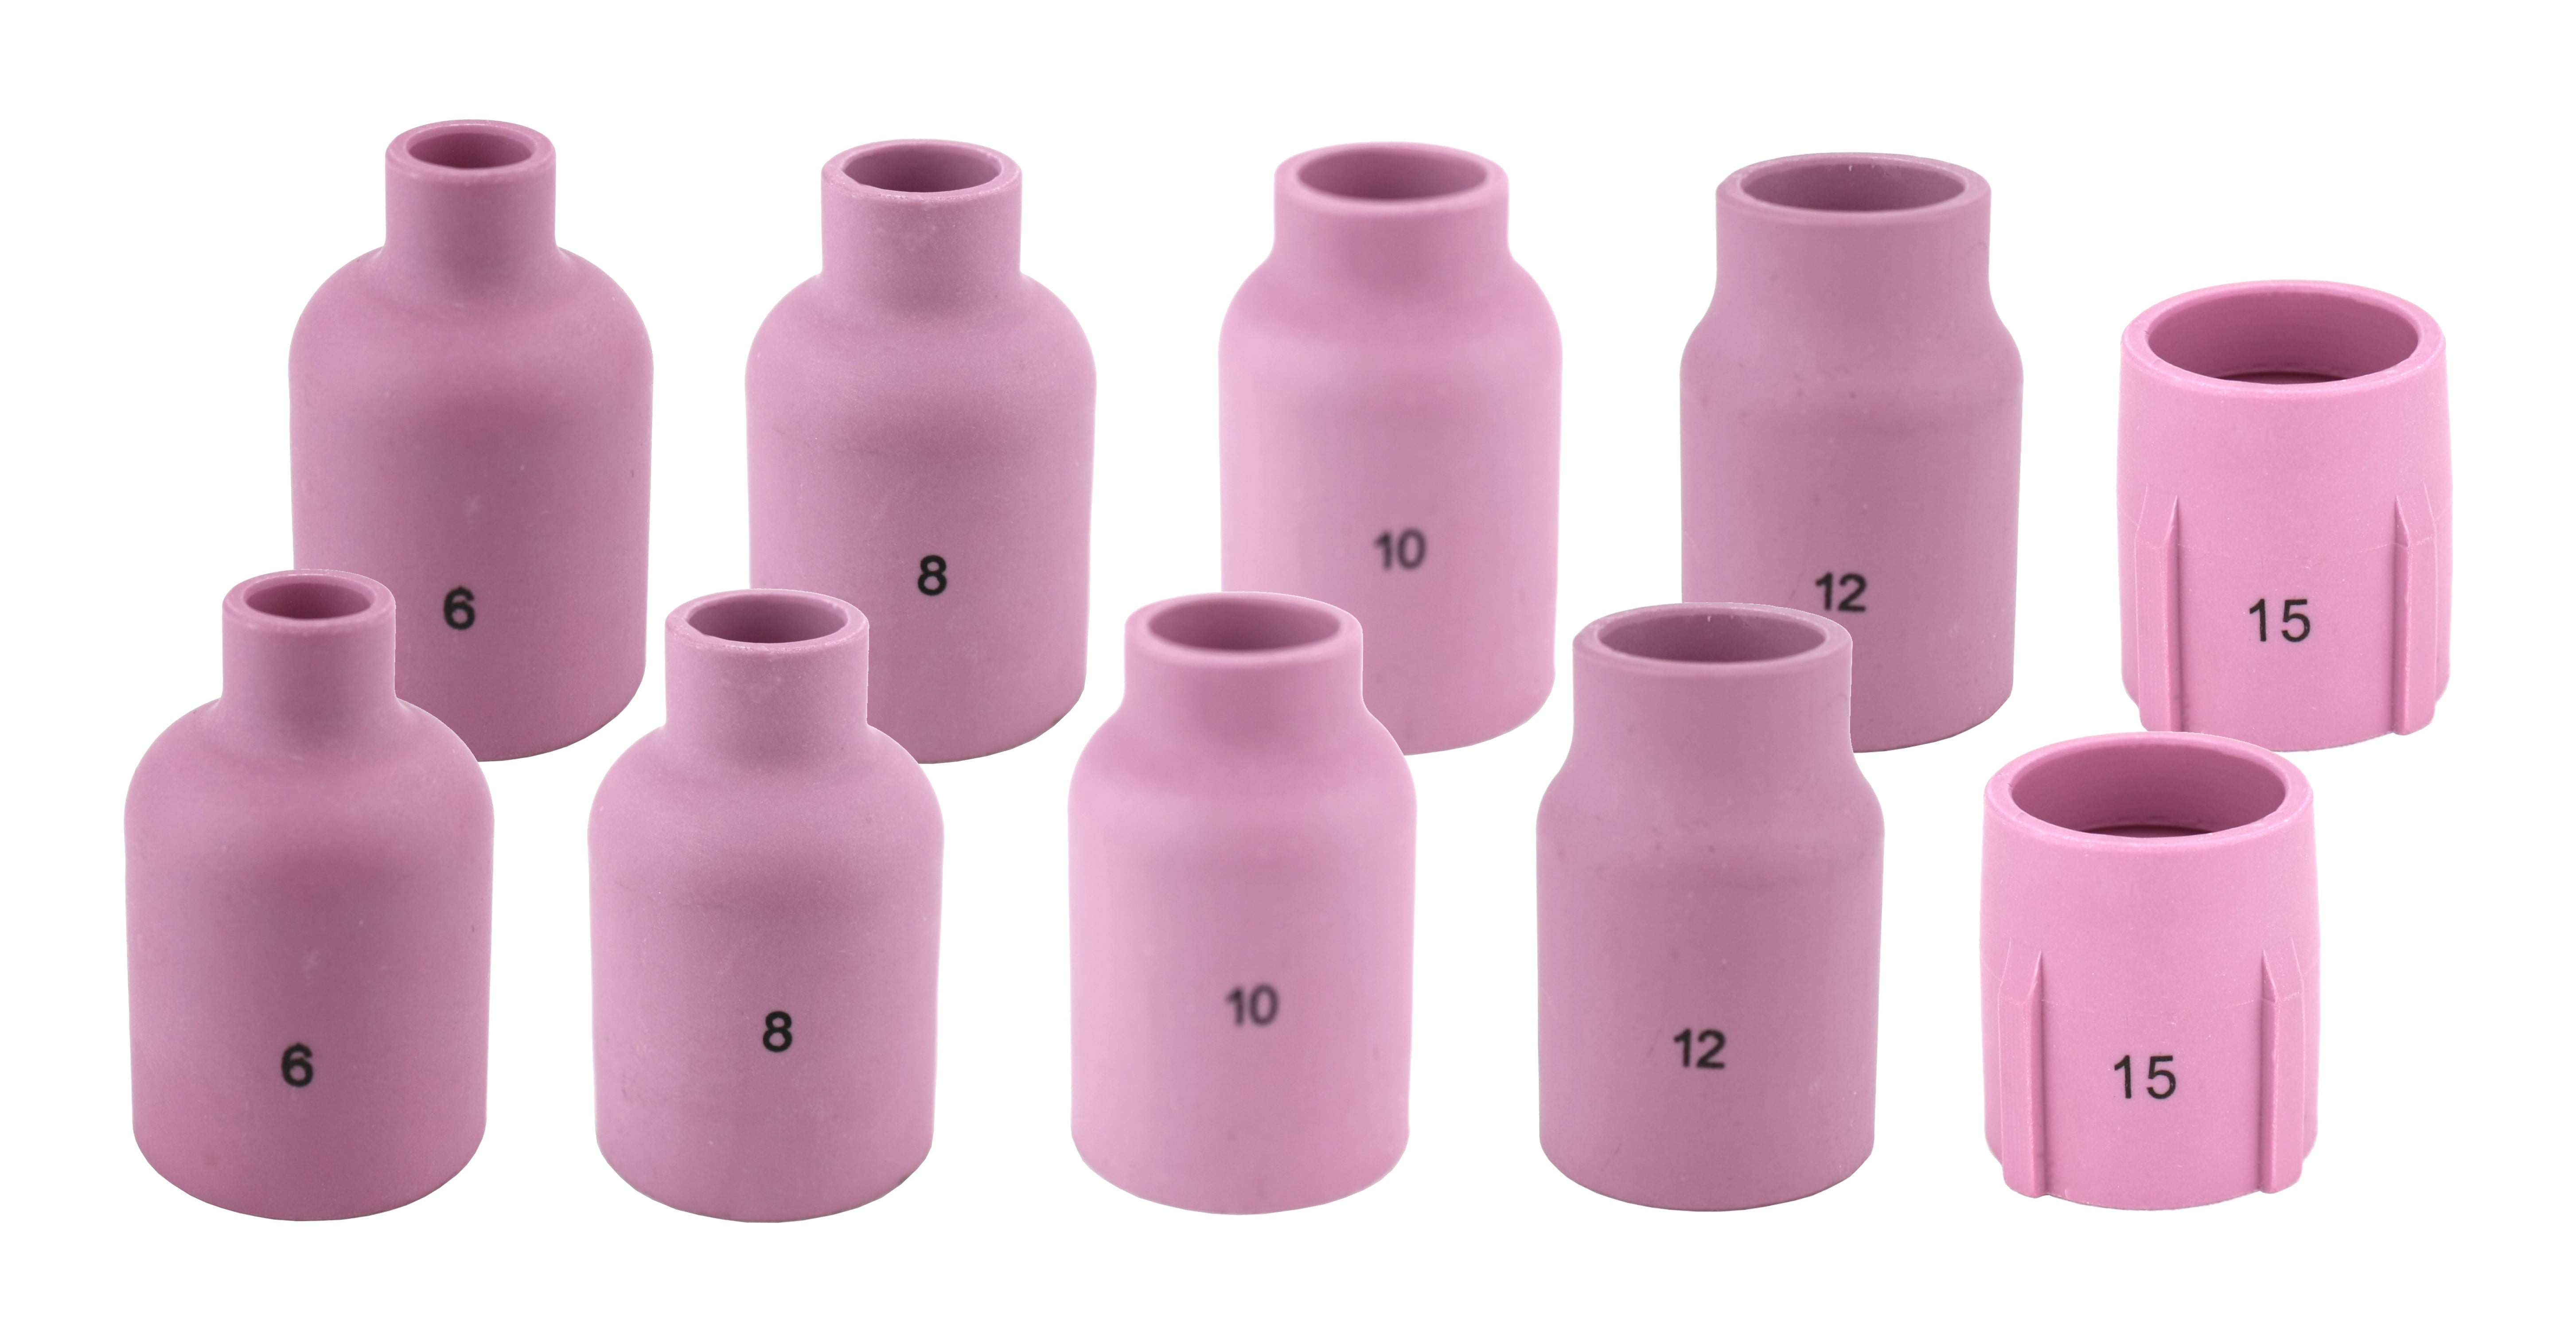 #10 Alumina Nozzle Cups for TIG Welding Torches Series 17/18/26 with Gas Lens Set-Up - 5/8 5 PACK Model: 54N19